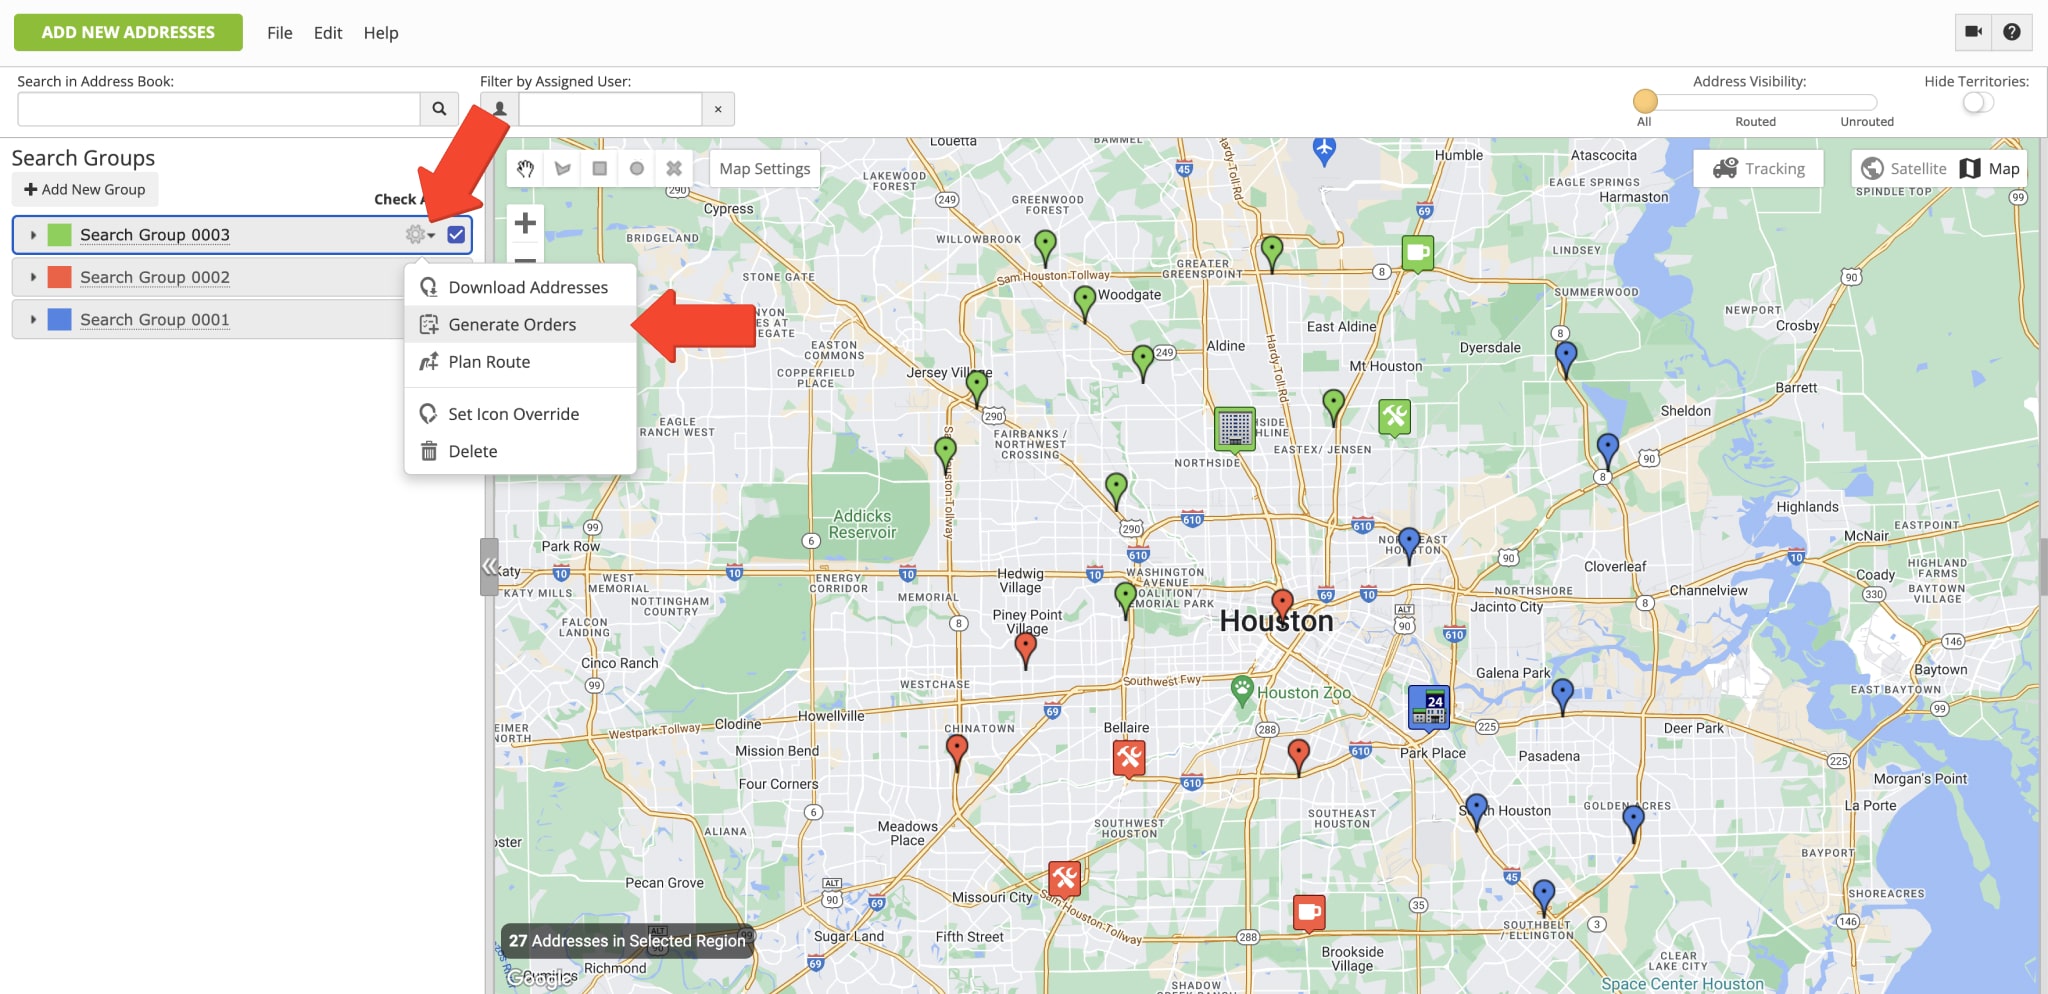 Generate orders with addresses and locations filtered on the Address Book Map using custom Search Groups.